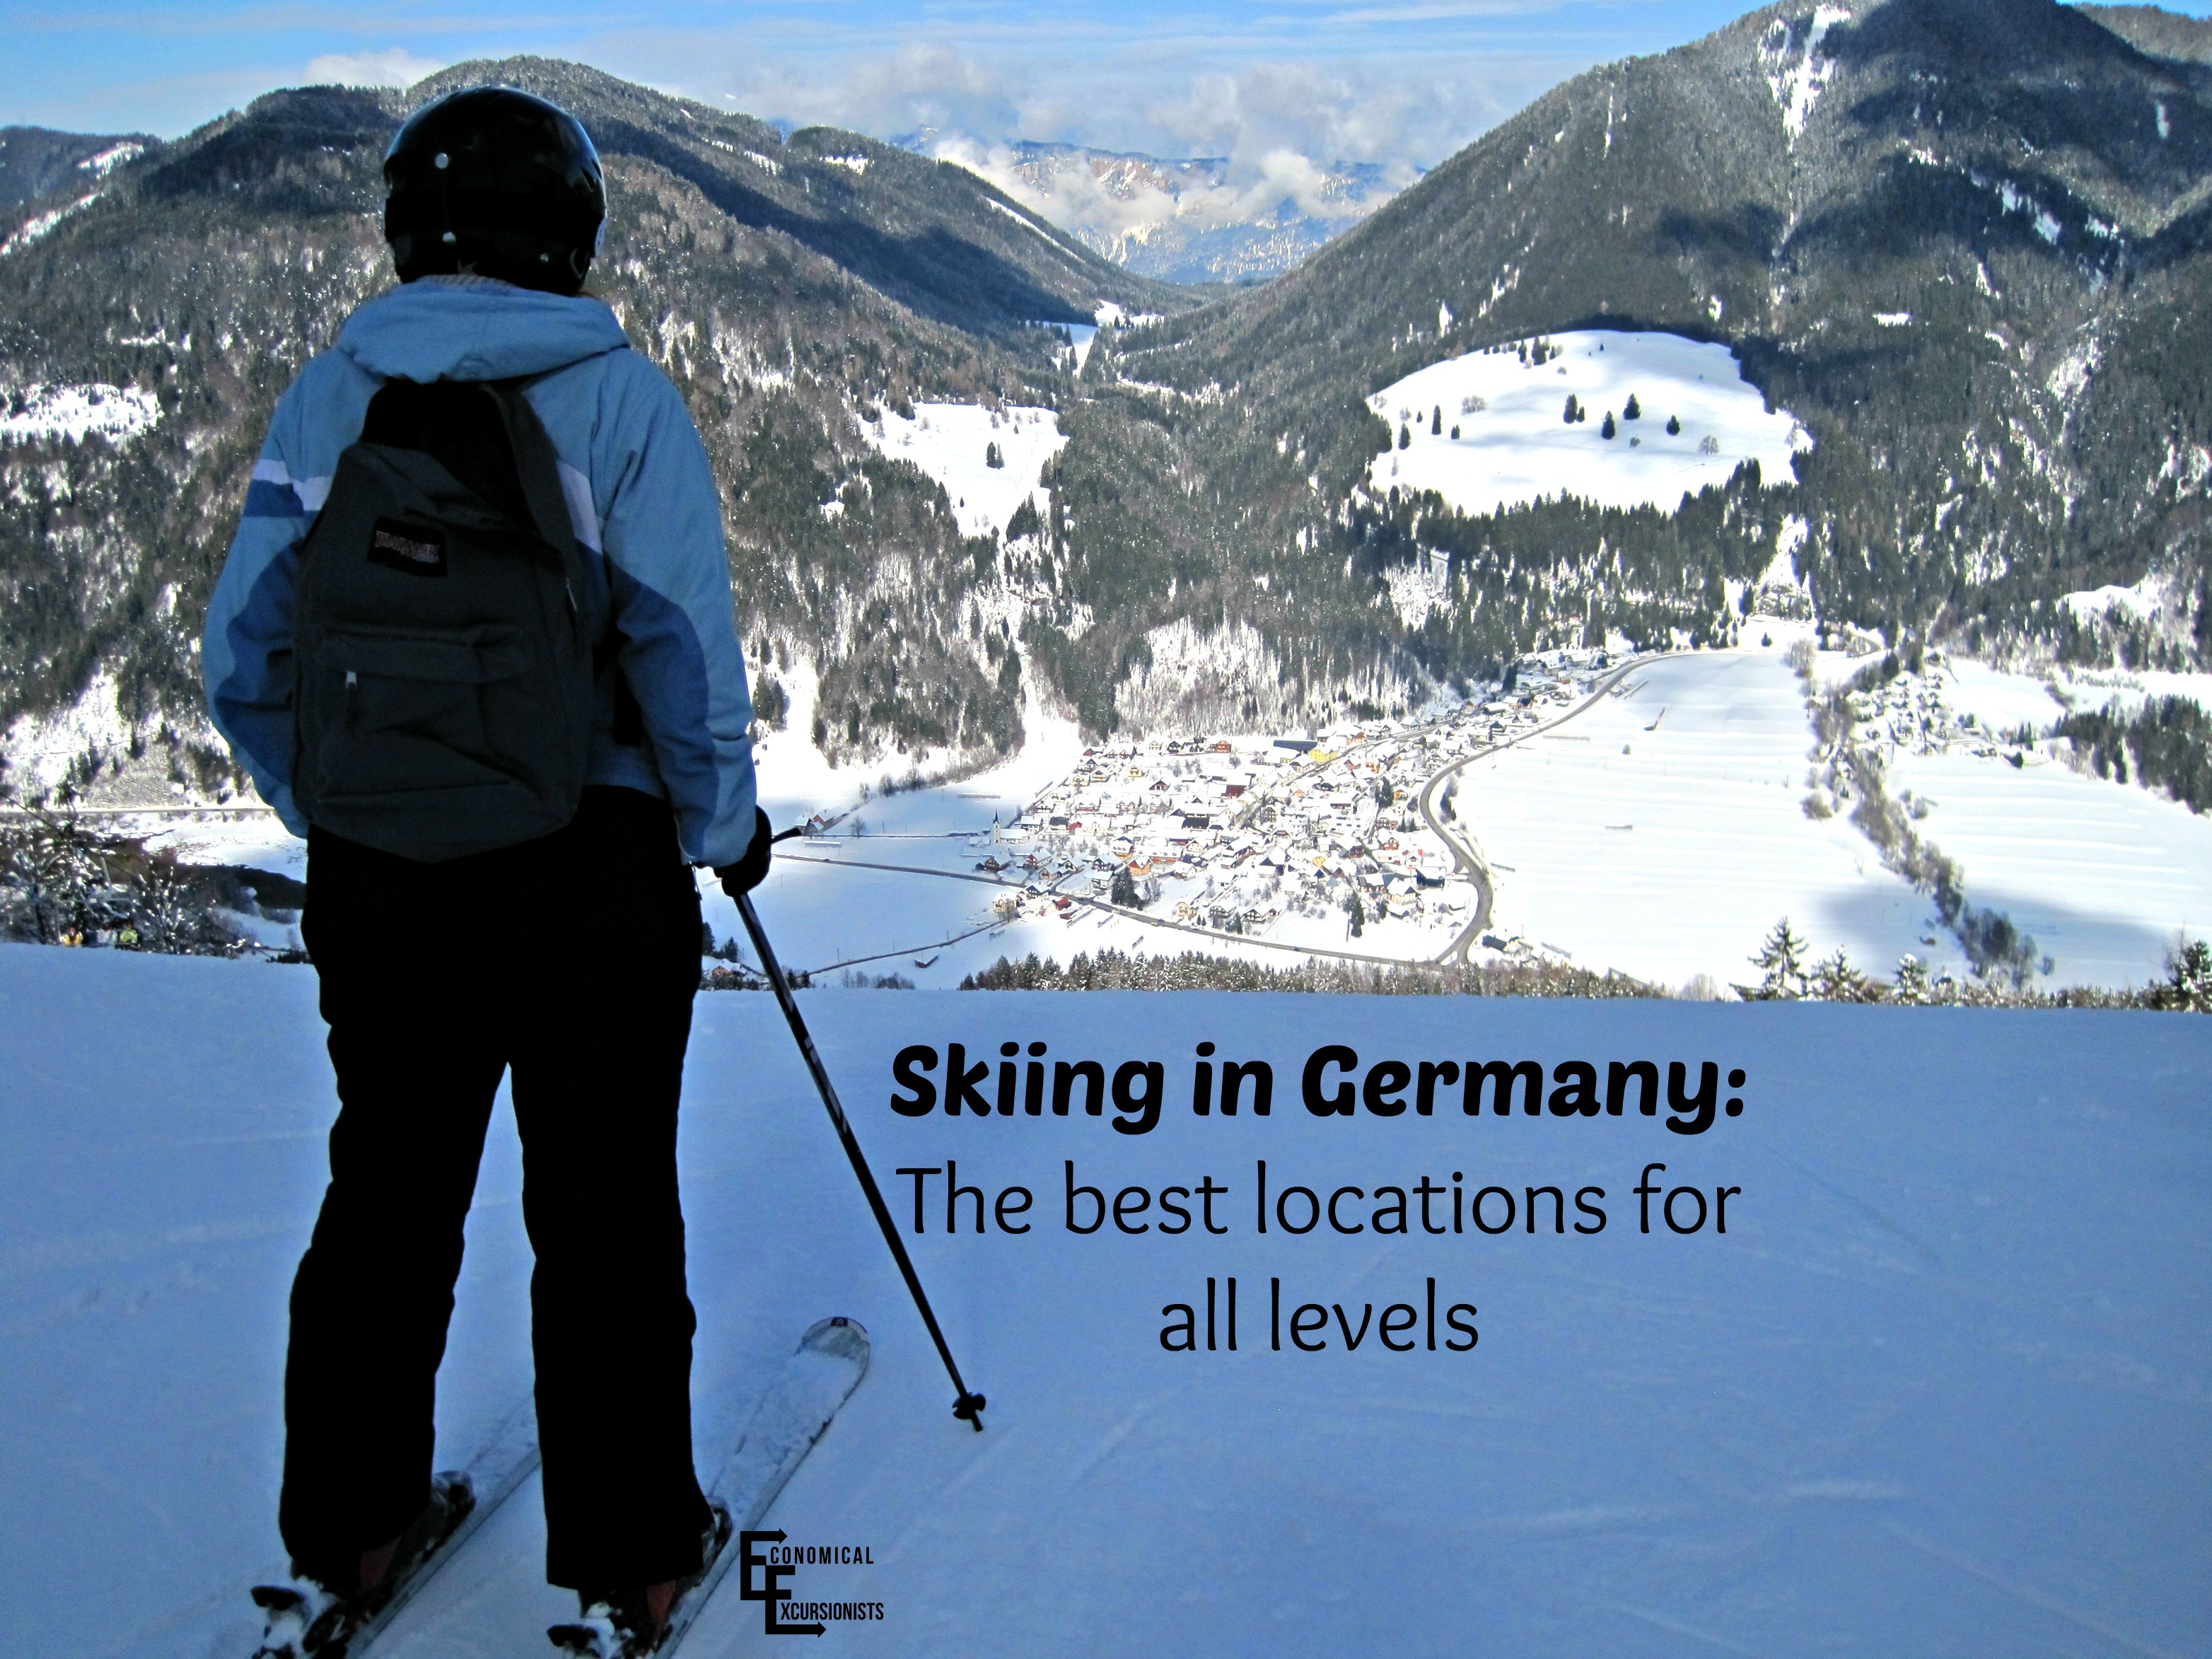 Great info on different locations to ski in Germany or right across into the Austrian border!